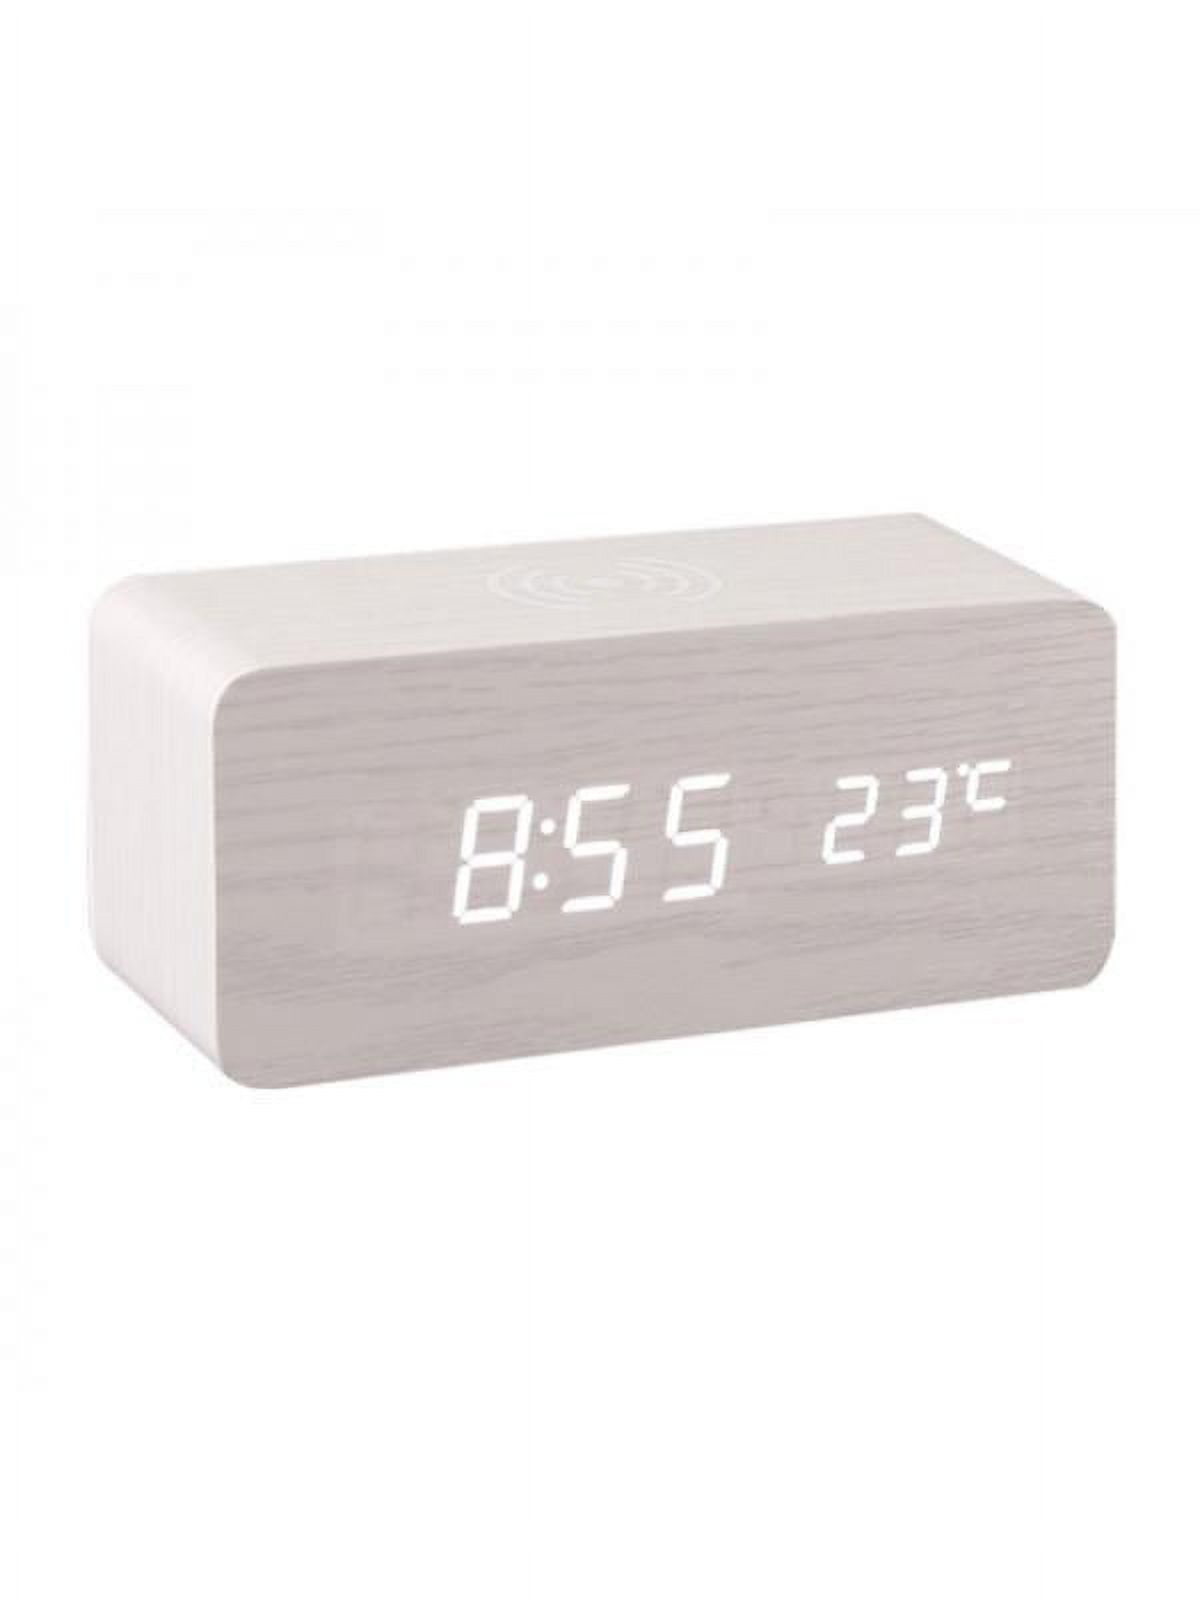 Dragonus Modern Wooden Electric Digital LED Desk Alarm Clock Thermometer Wireless Charger - image 1 of 4